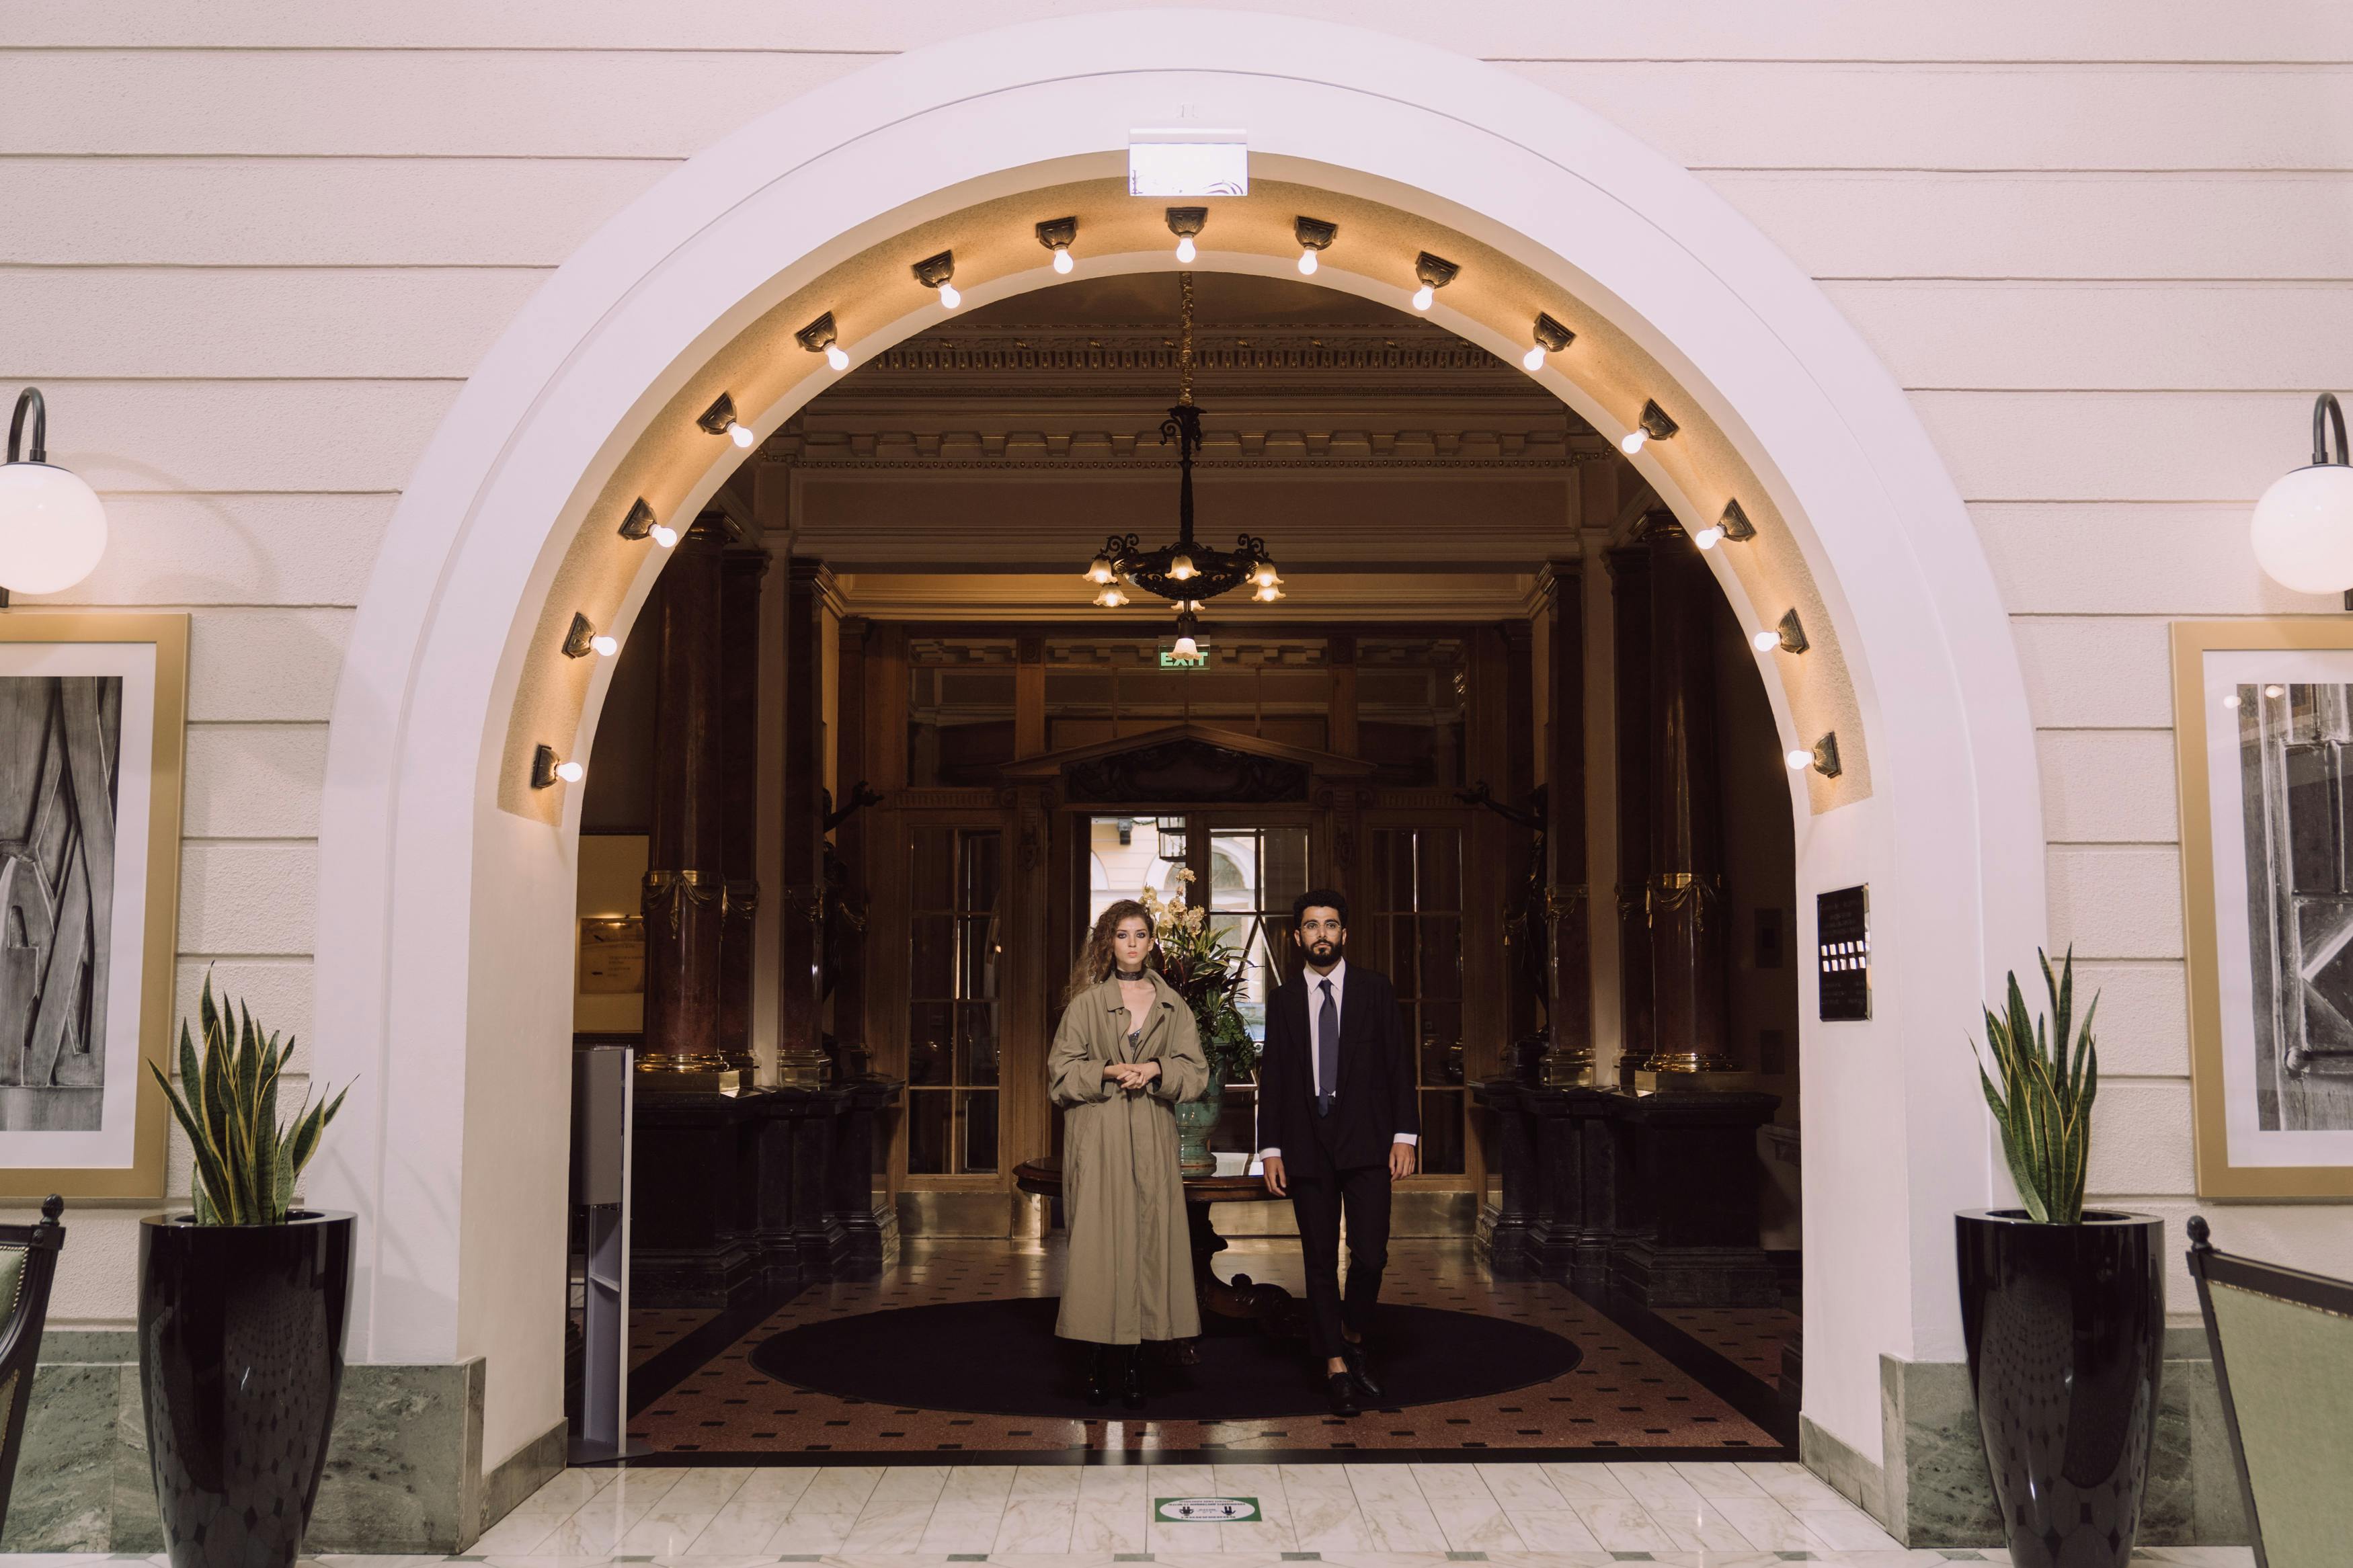 Two people standing at a hotel entrance | Source: Pexels